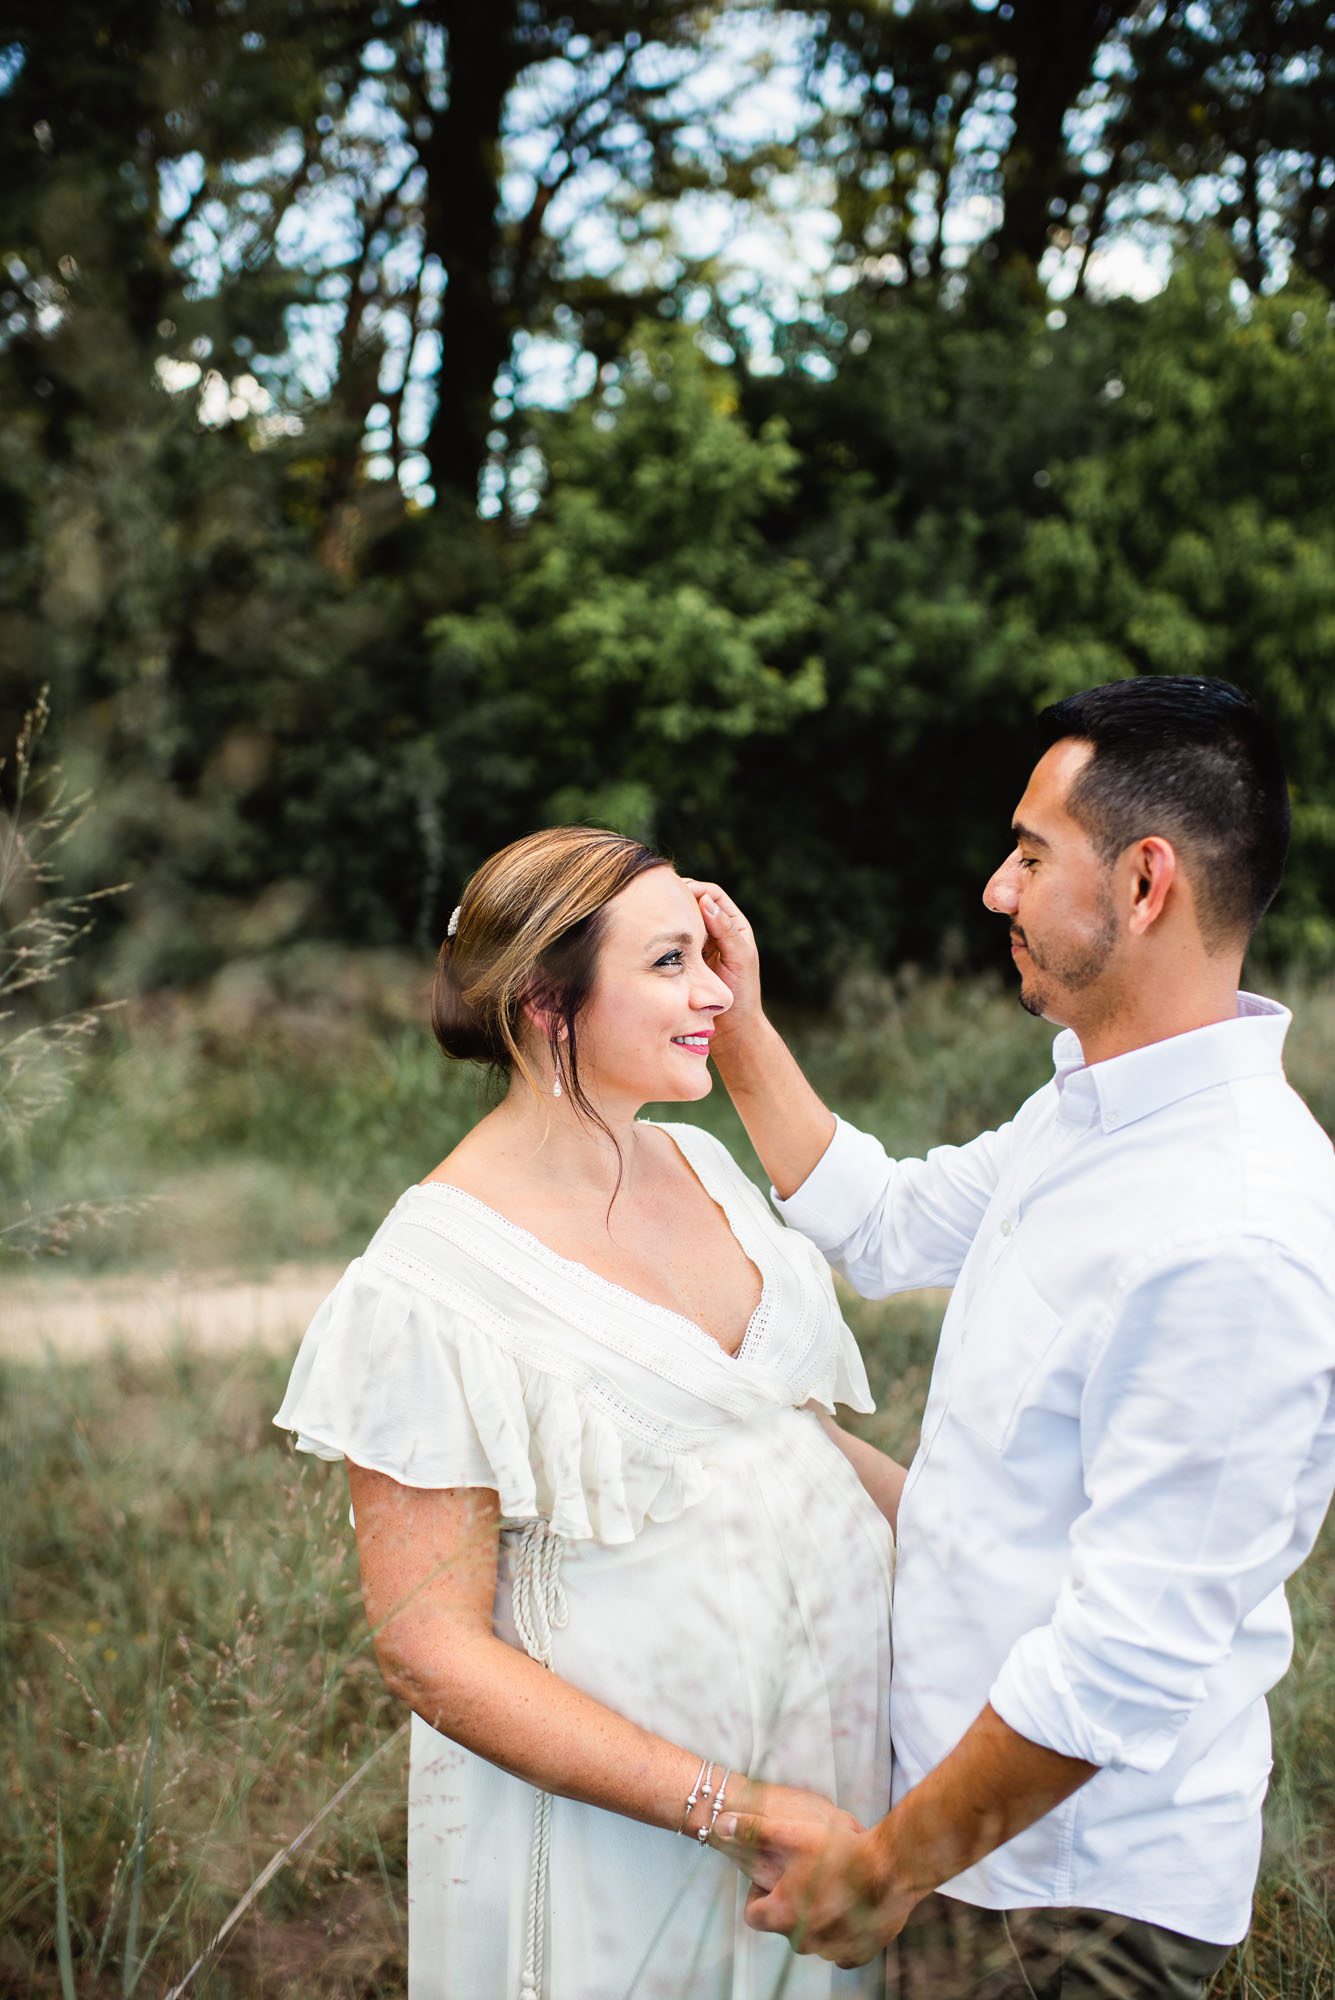 Pregnant mom smiling at husband in a field, San Antonio maternity photographer